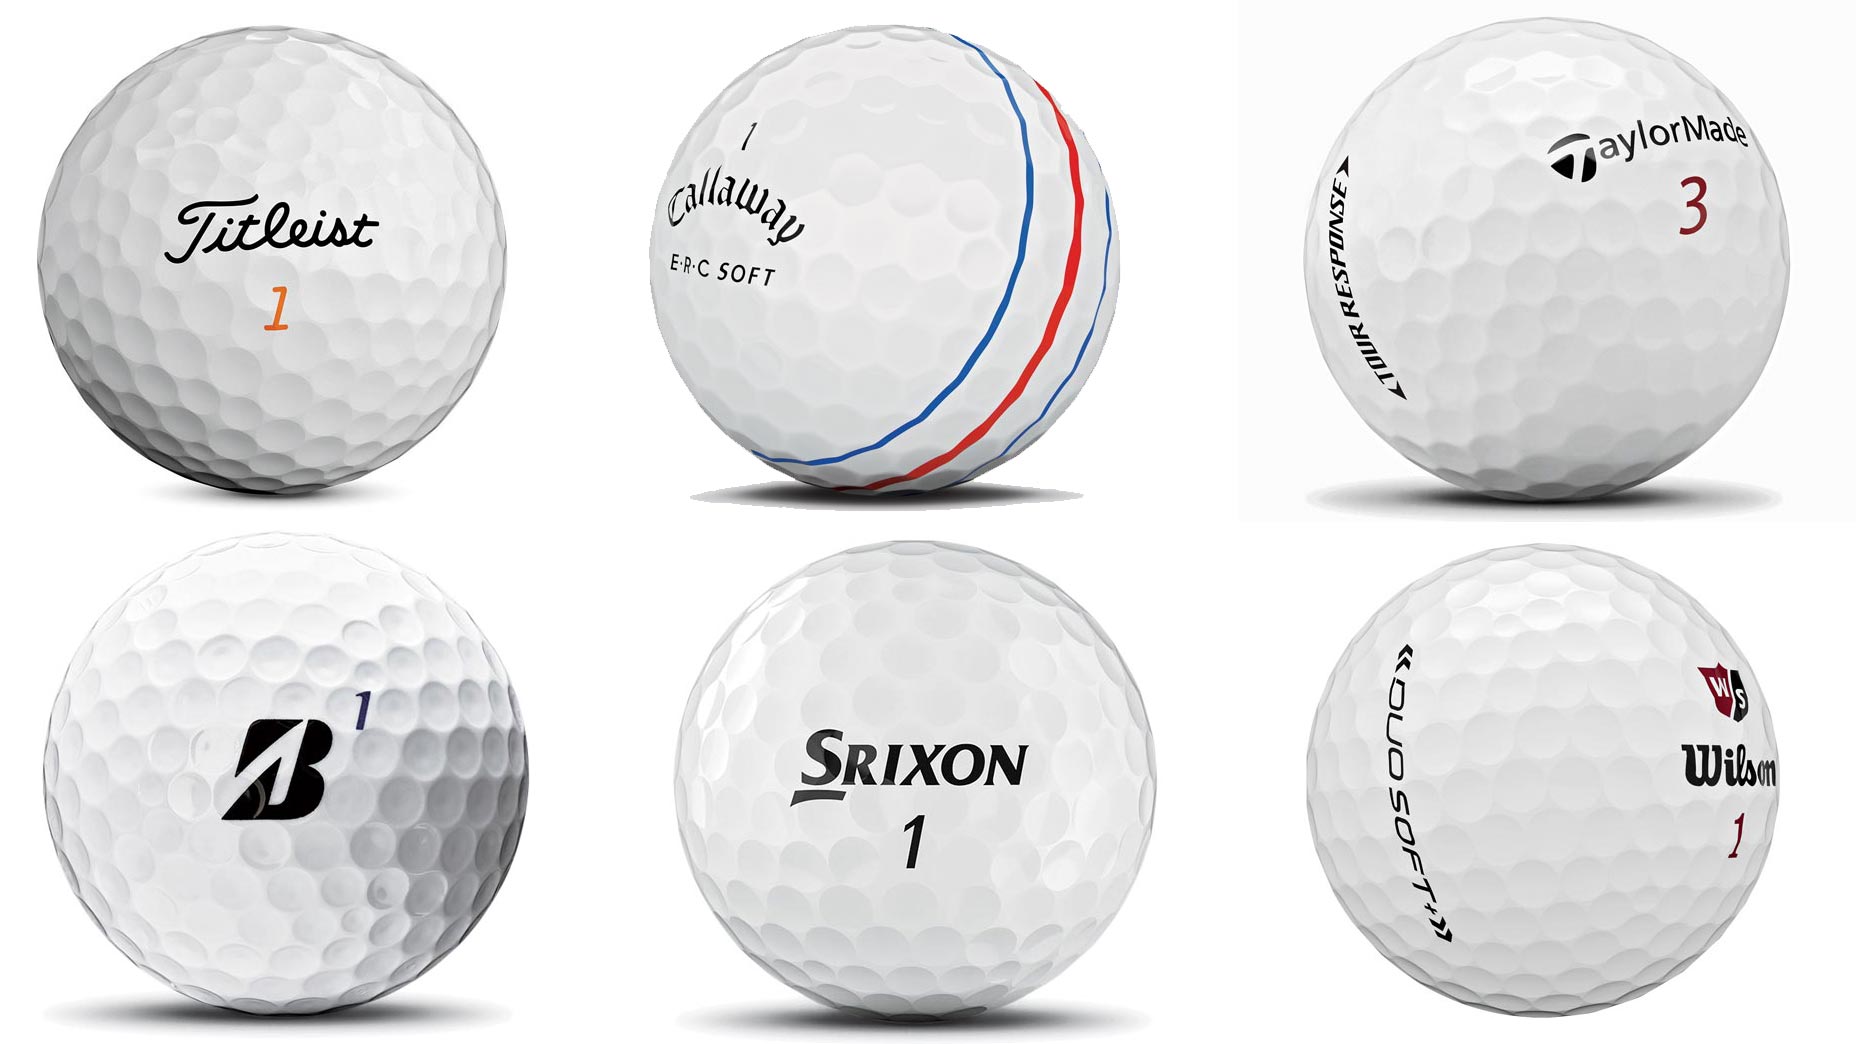 Six golf balls from leading golf ball manufacturers.